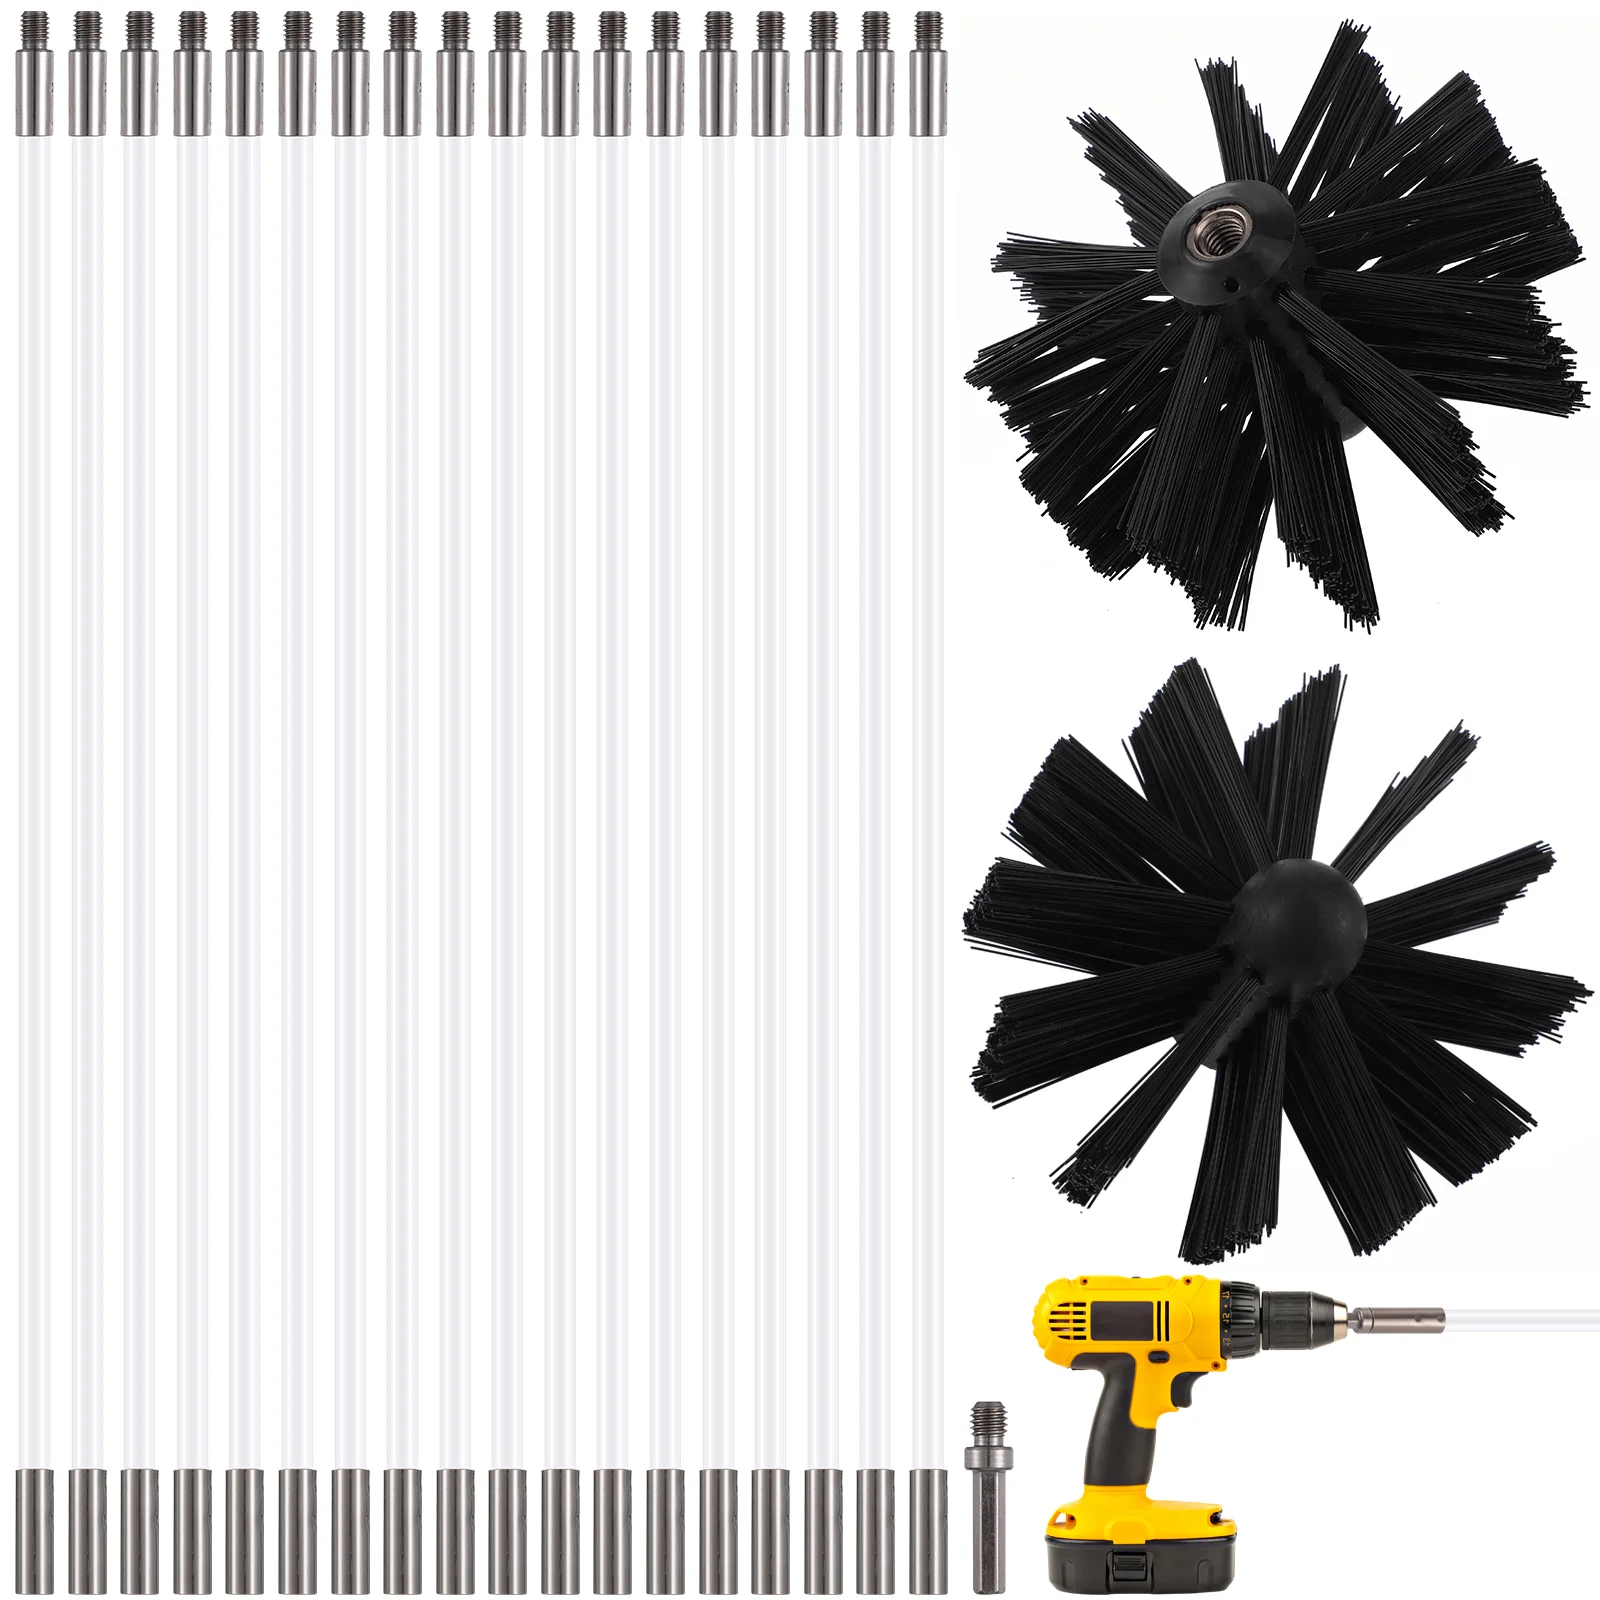 

Chimney Brushes Chimney Sweep Rods Cleaning Brushes Gutter Cleaning Tools With Brush Heads Brush For Channel Cleaning